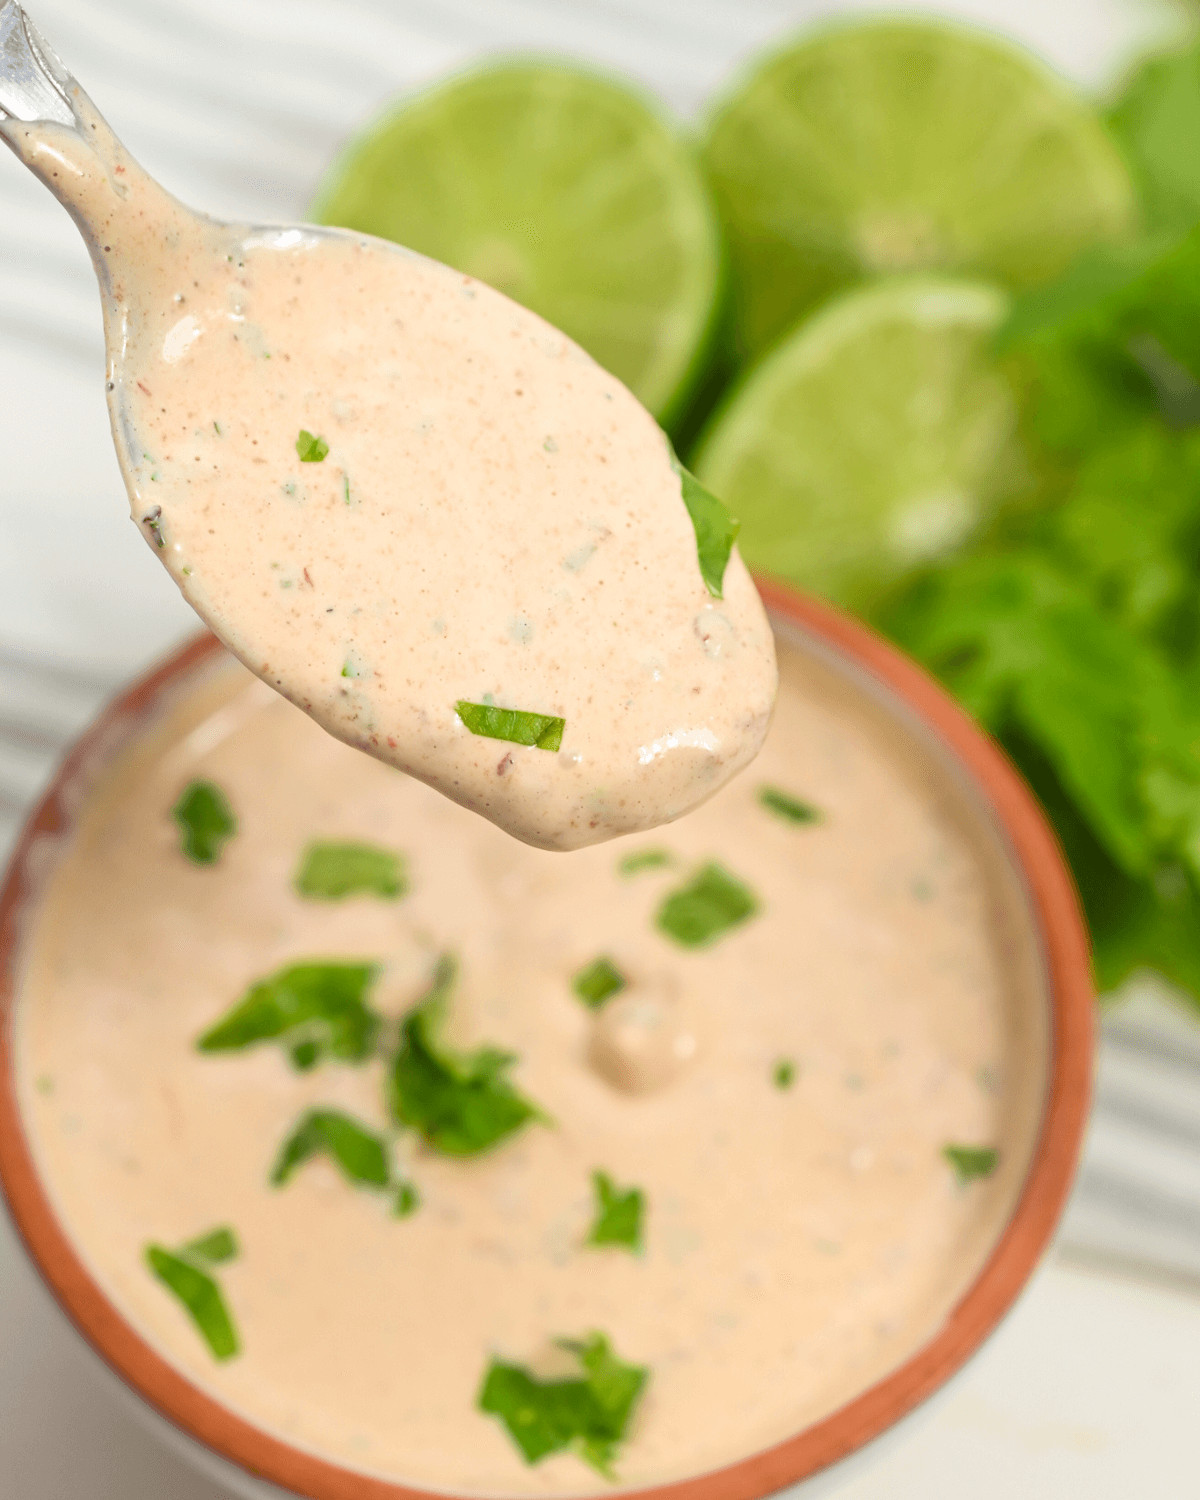 A spoonful of creamy Baja Chipotle sauce with chopped herbs, above a bowl, with fresh lime and lettuce in the background.